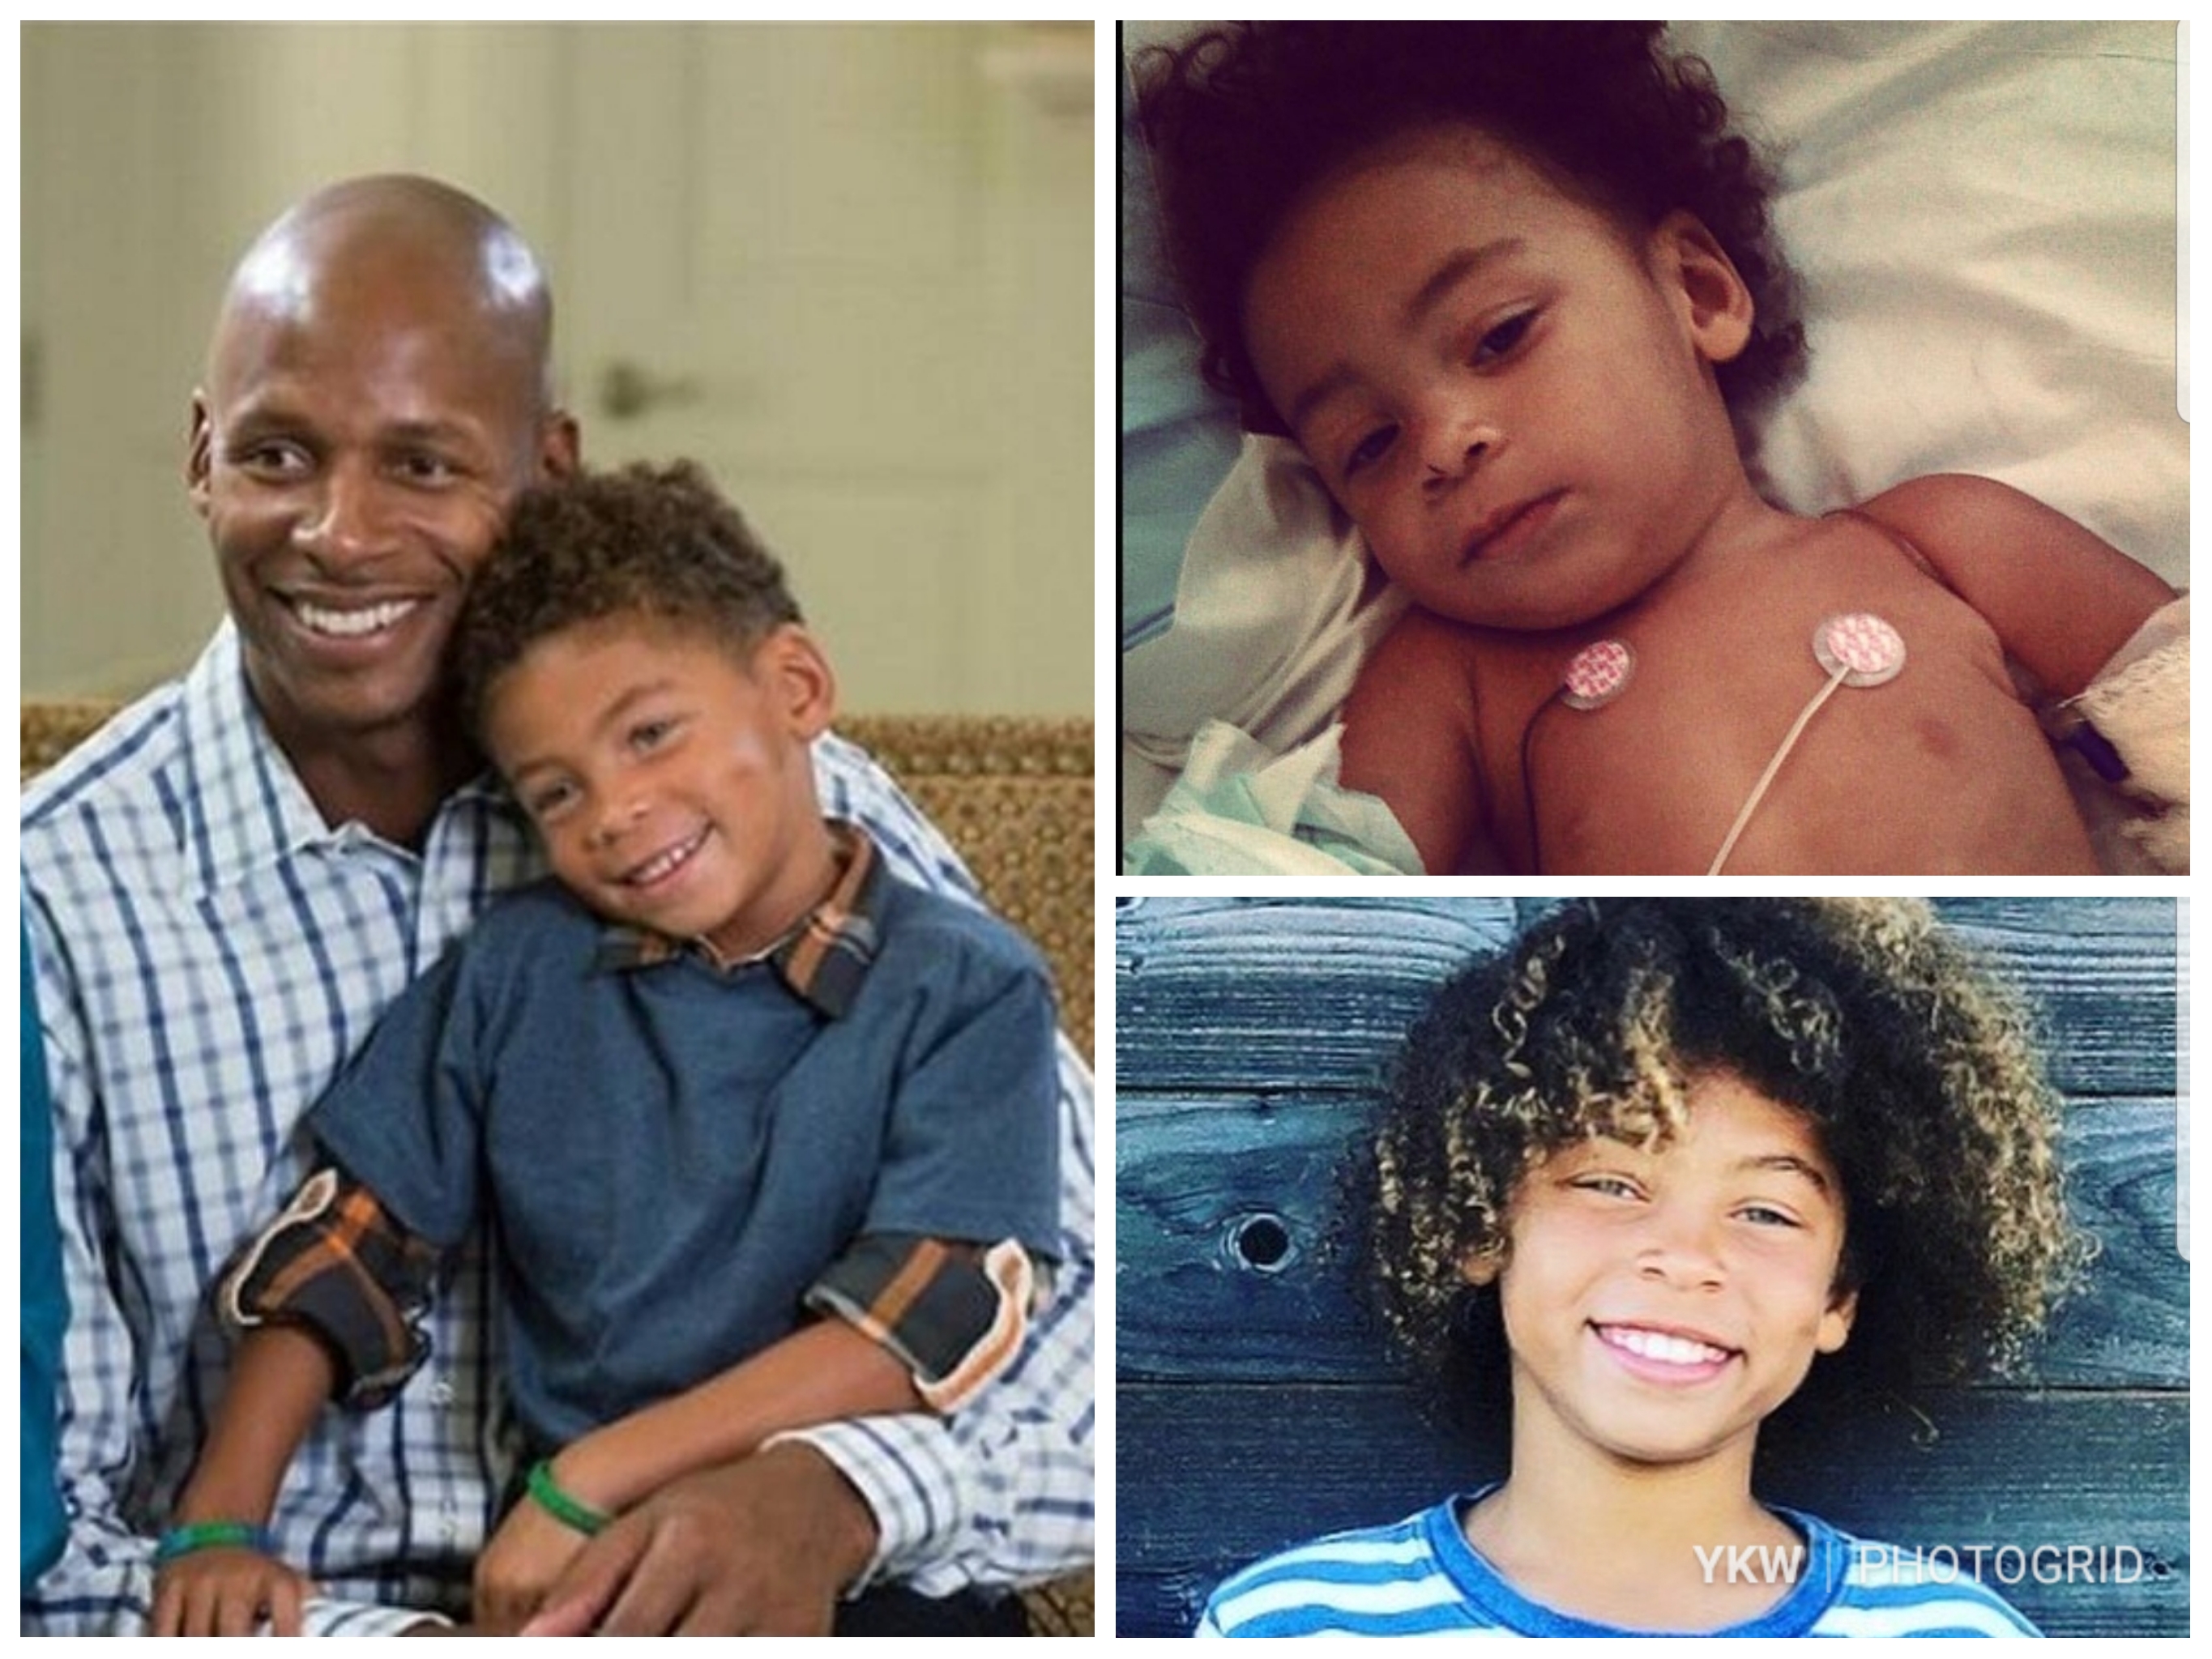 Ray Allen Shows Love For His 12-Year Old Hero Son Living With Type 1 Diabetes On World Diabetes Day